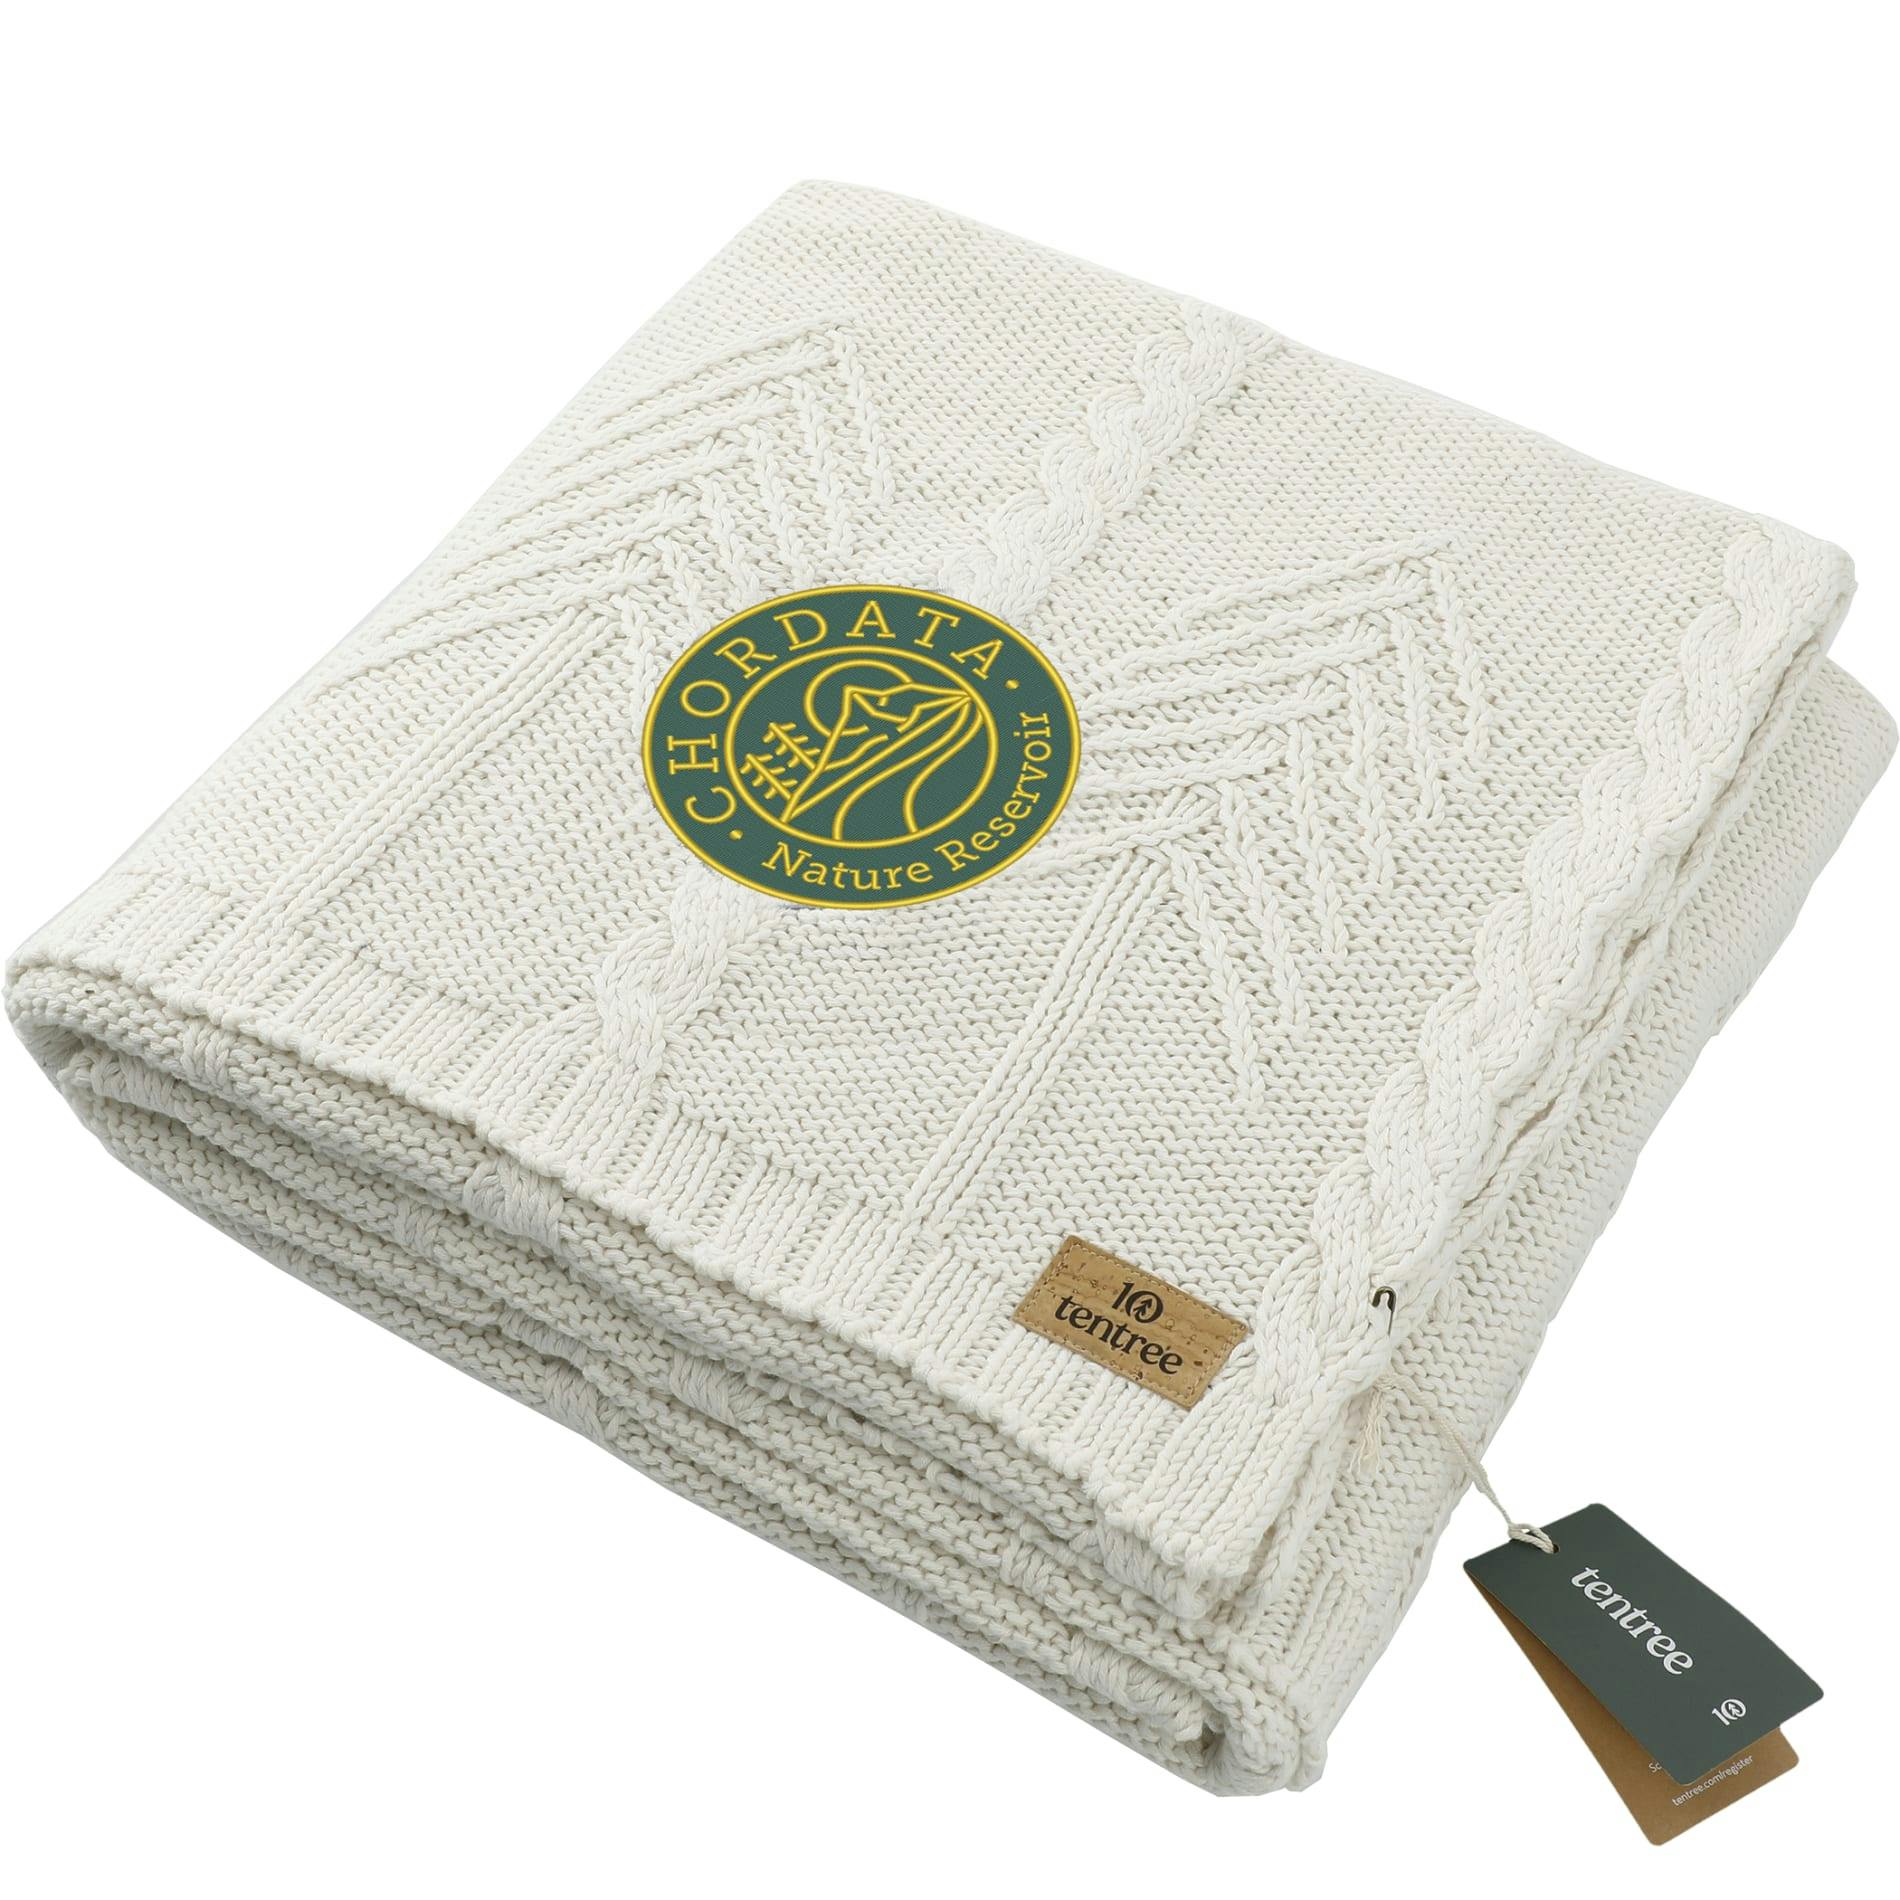 tentree Organic Cotton Cable Blanket - additional Image 2